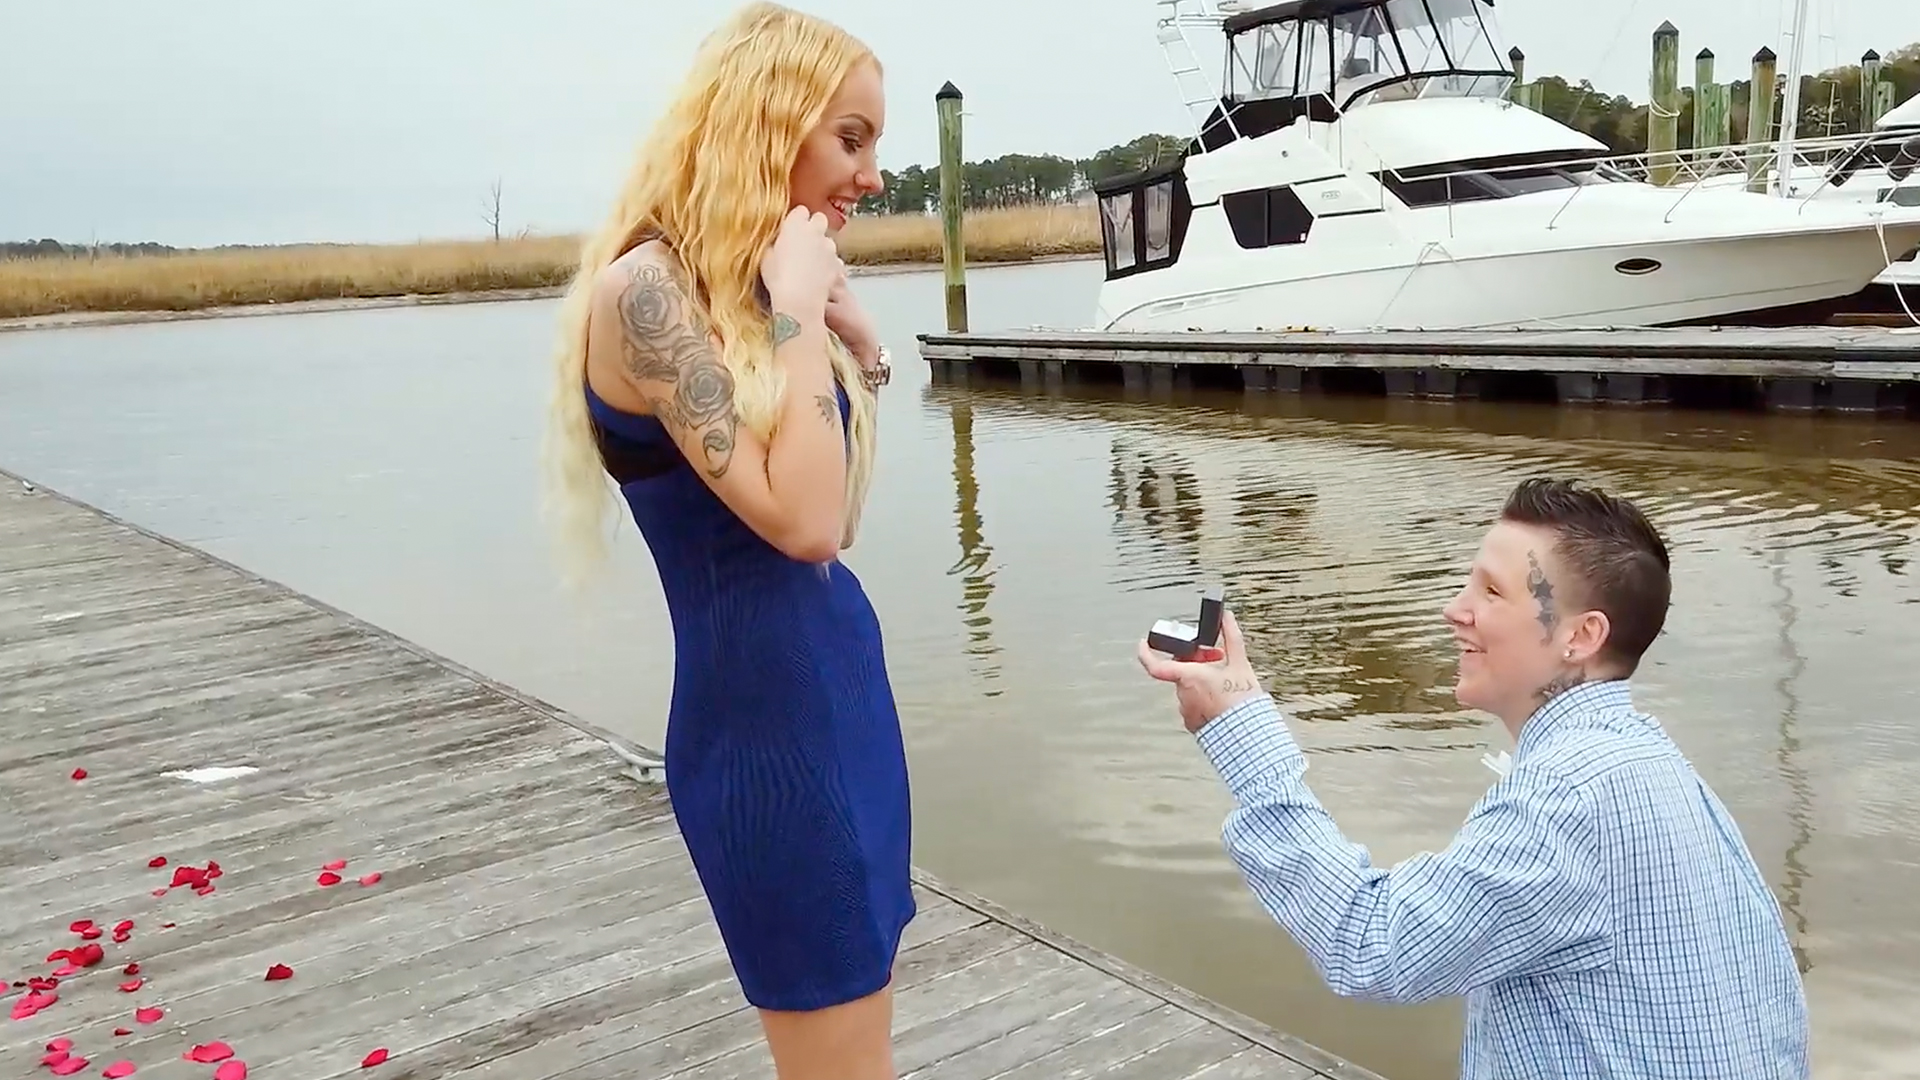 Top 5 Arresting Moments: Tia Proposes to Nicolle!